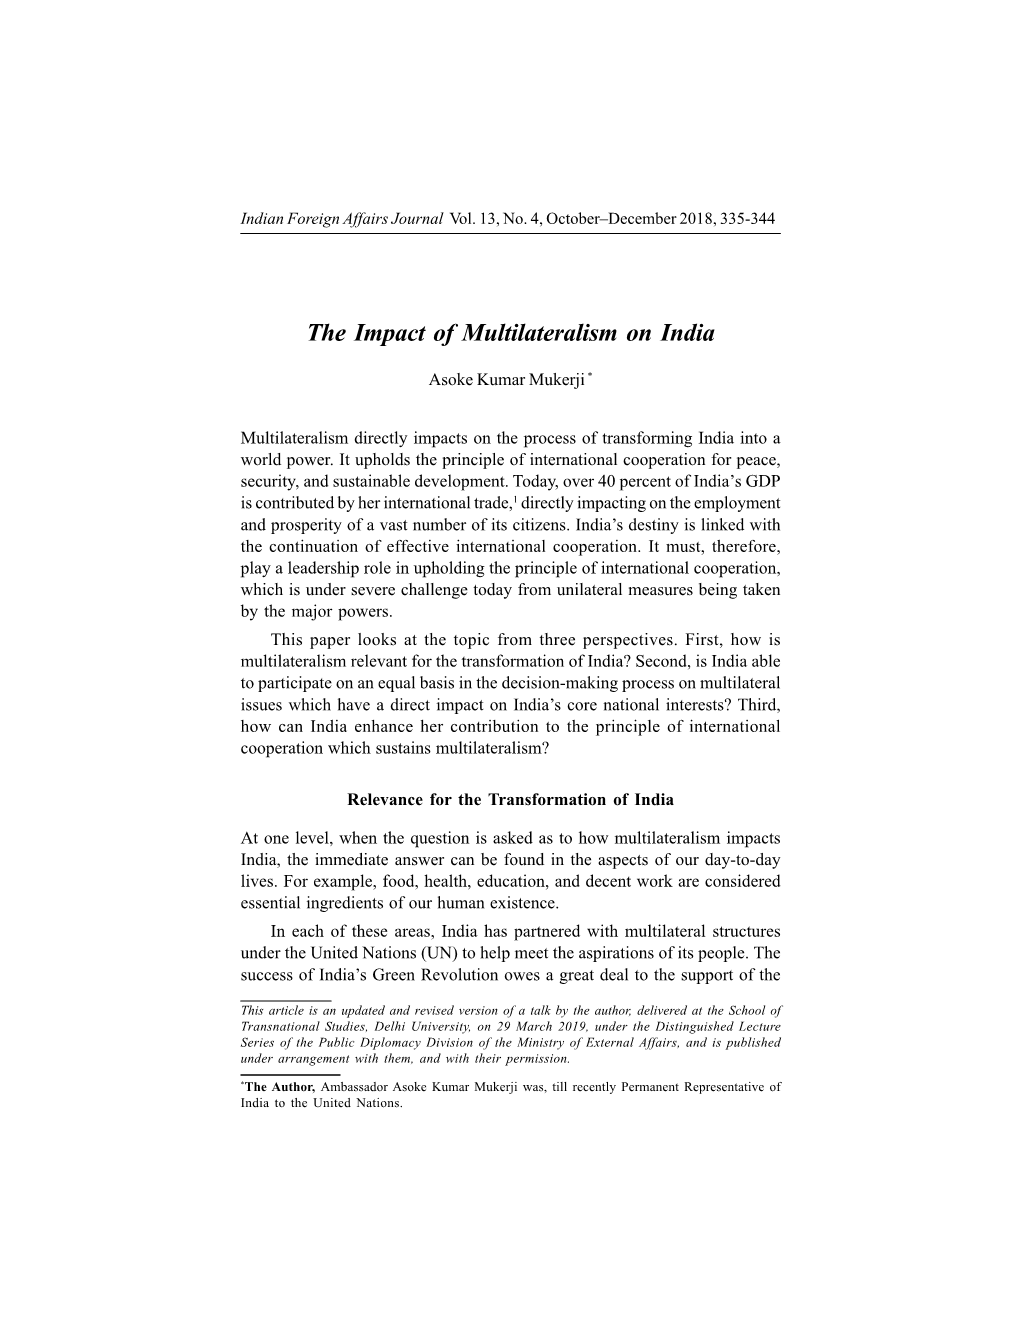 The Impact of Multilateralism on India